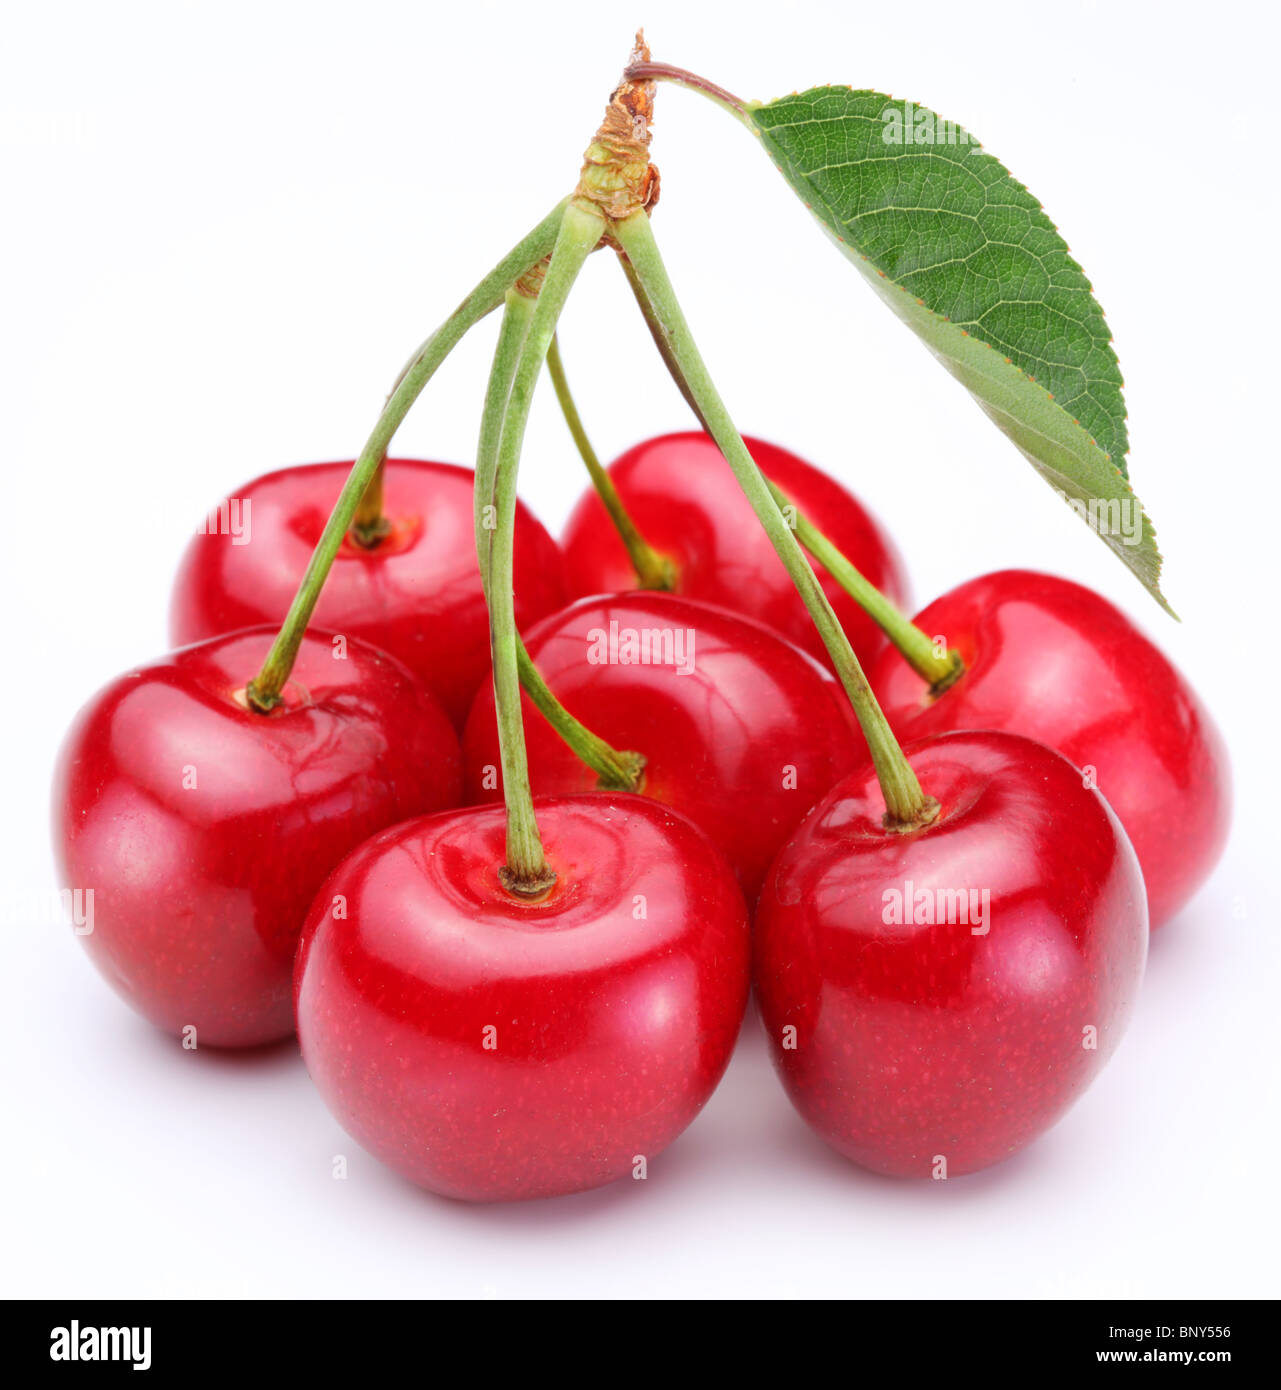 Group of ripe cherries on a white background. Stock Photo